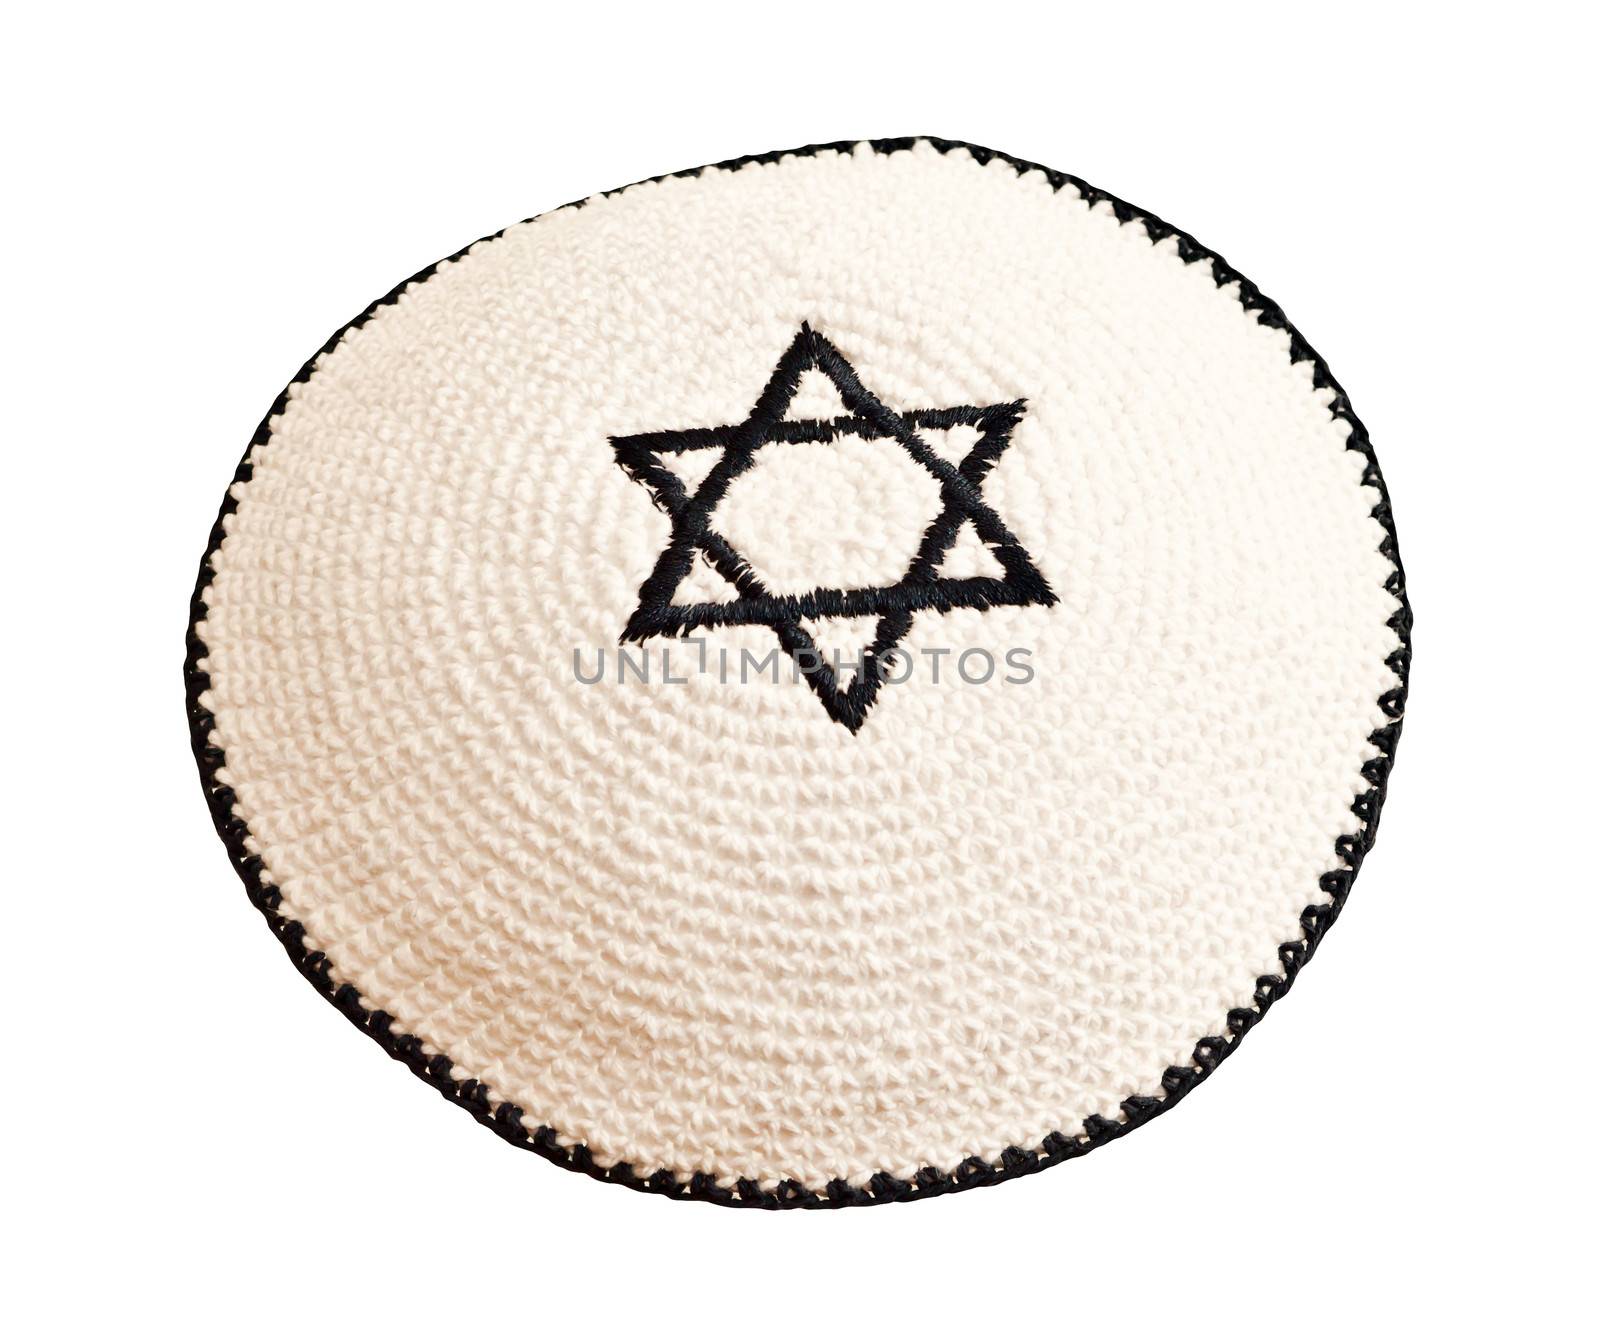 Traditional jewish headwear with embroidered star of David
